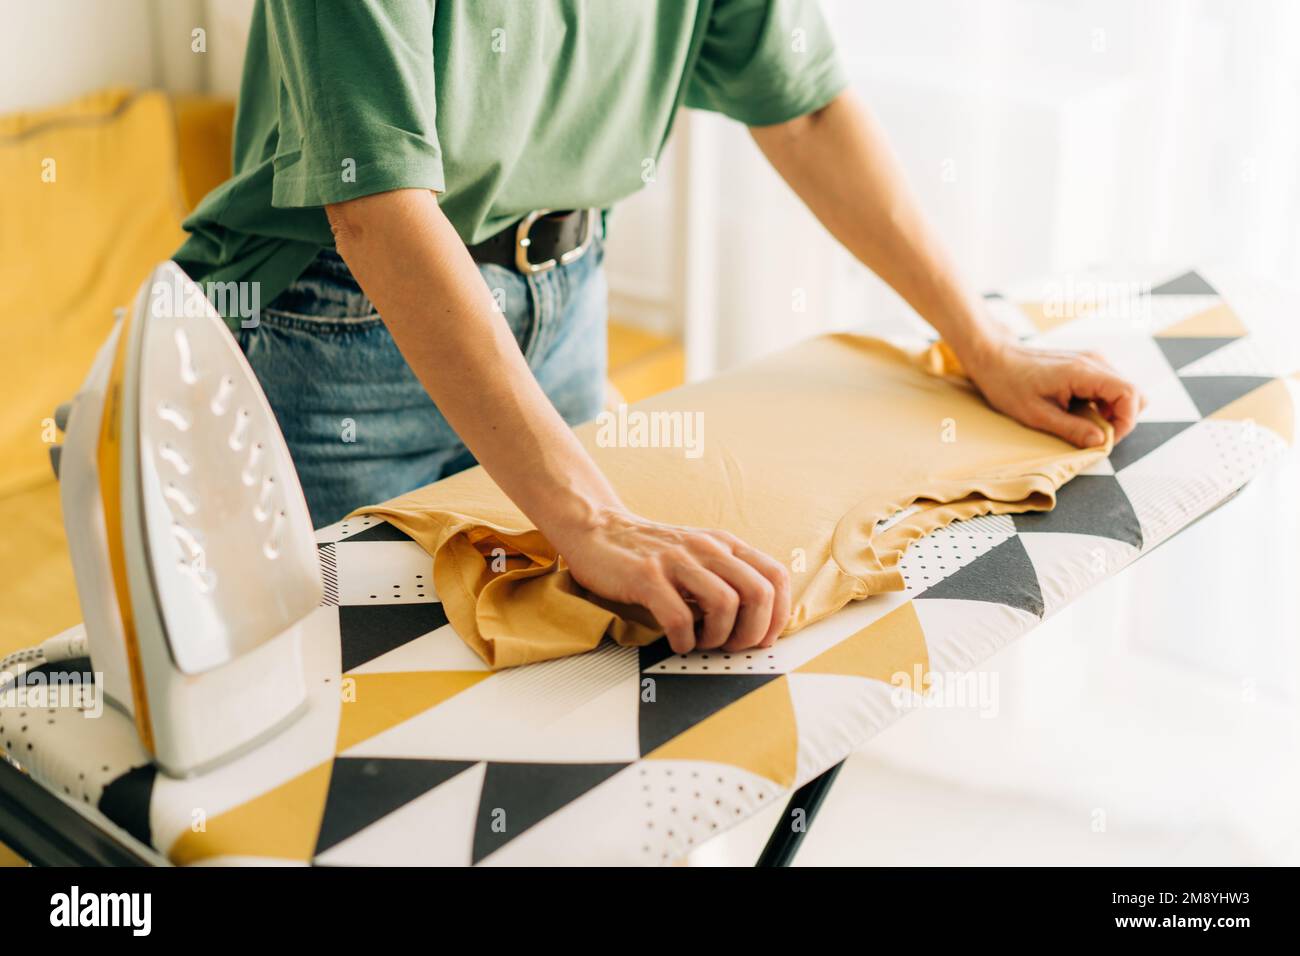 Close-up of an unrecognizable woman ironing linen on an ironing board. Stock Photo